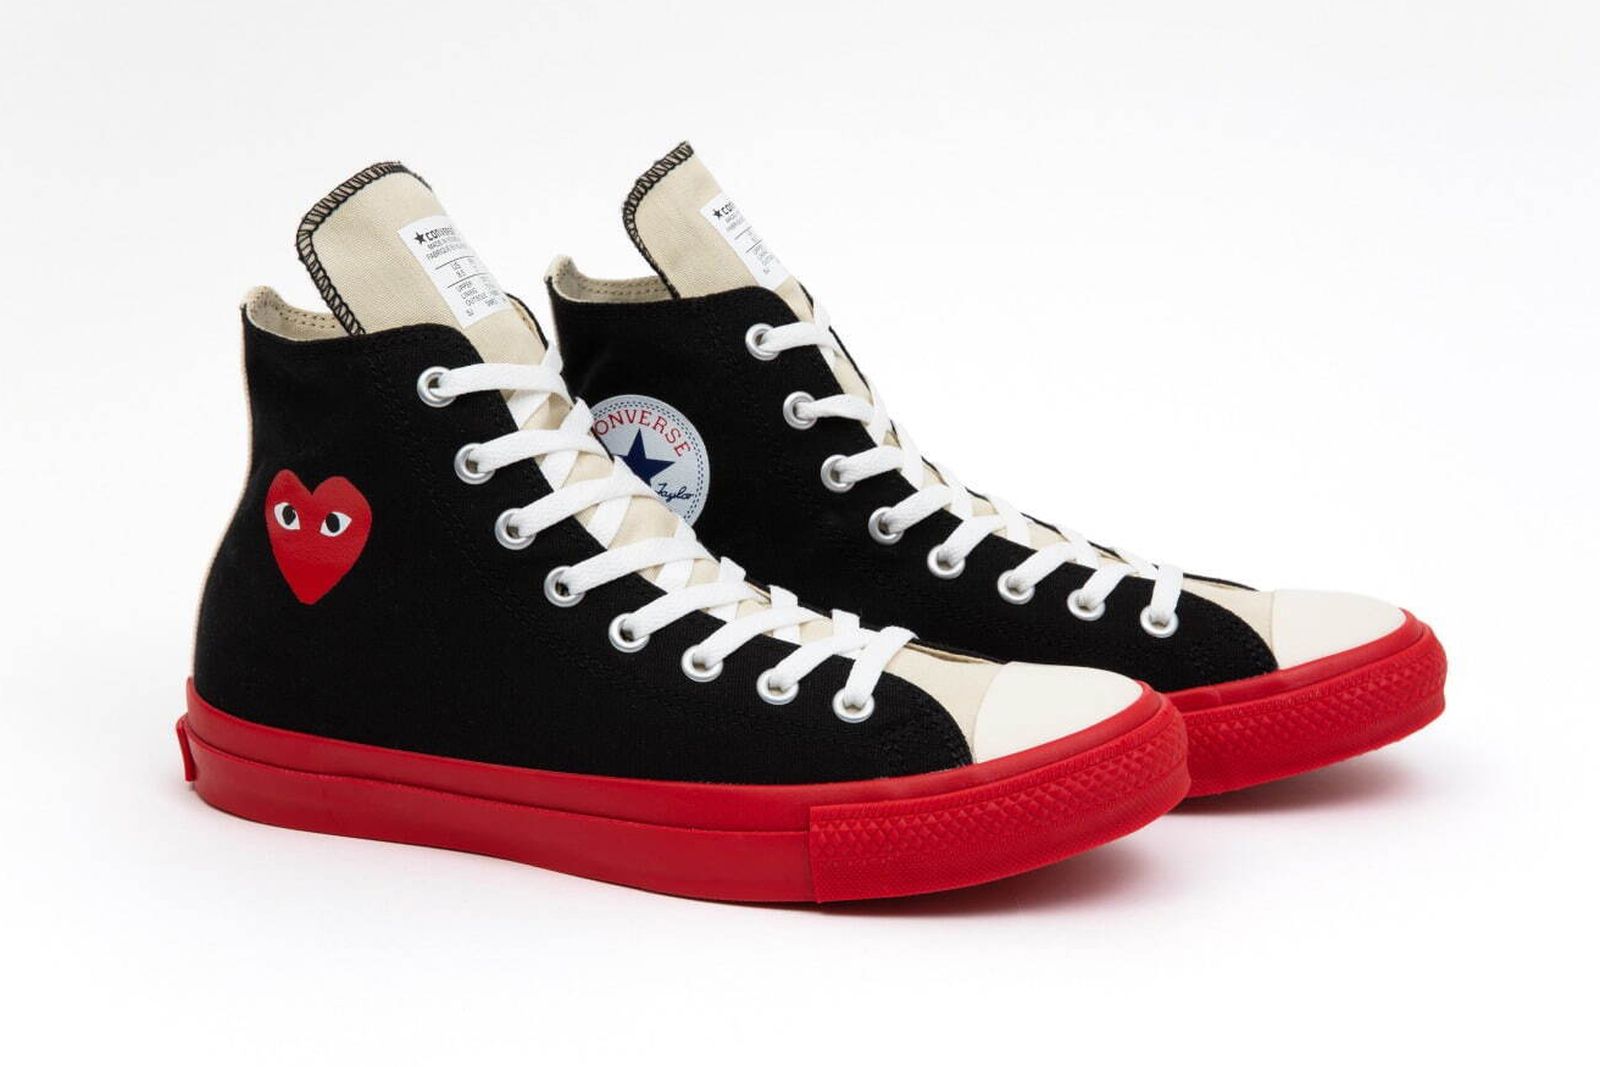 log Strait thong Variant CdG Play & Converse Drop New Collab Sneakers: Price, Release Date